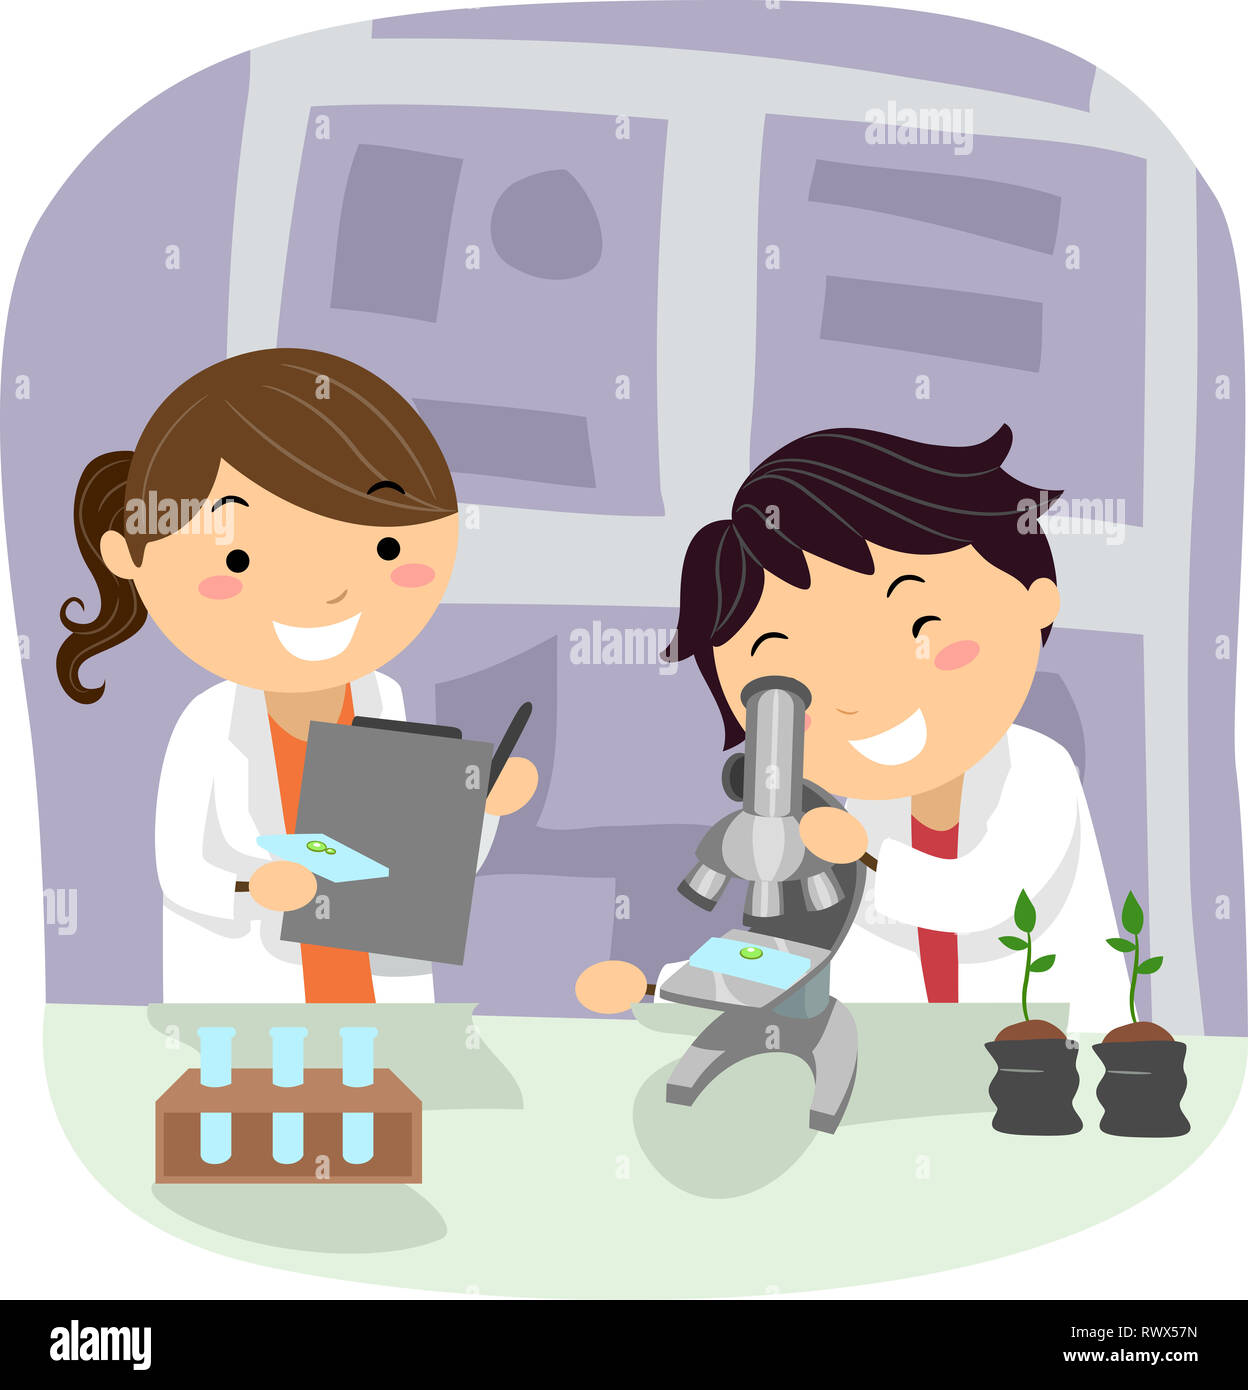 Illustration of Stickman Kids Botanist Conducting an Experiment with Seedlings at the Lab Stock Photo